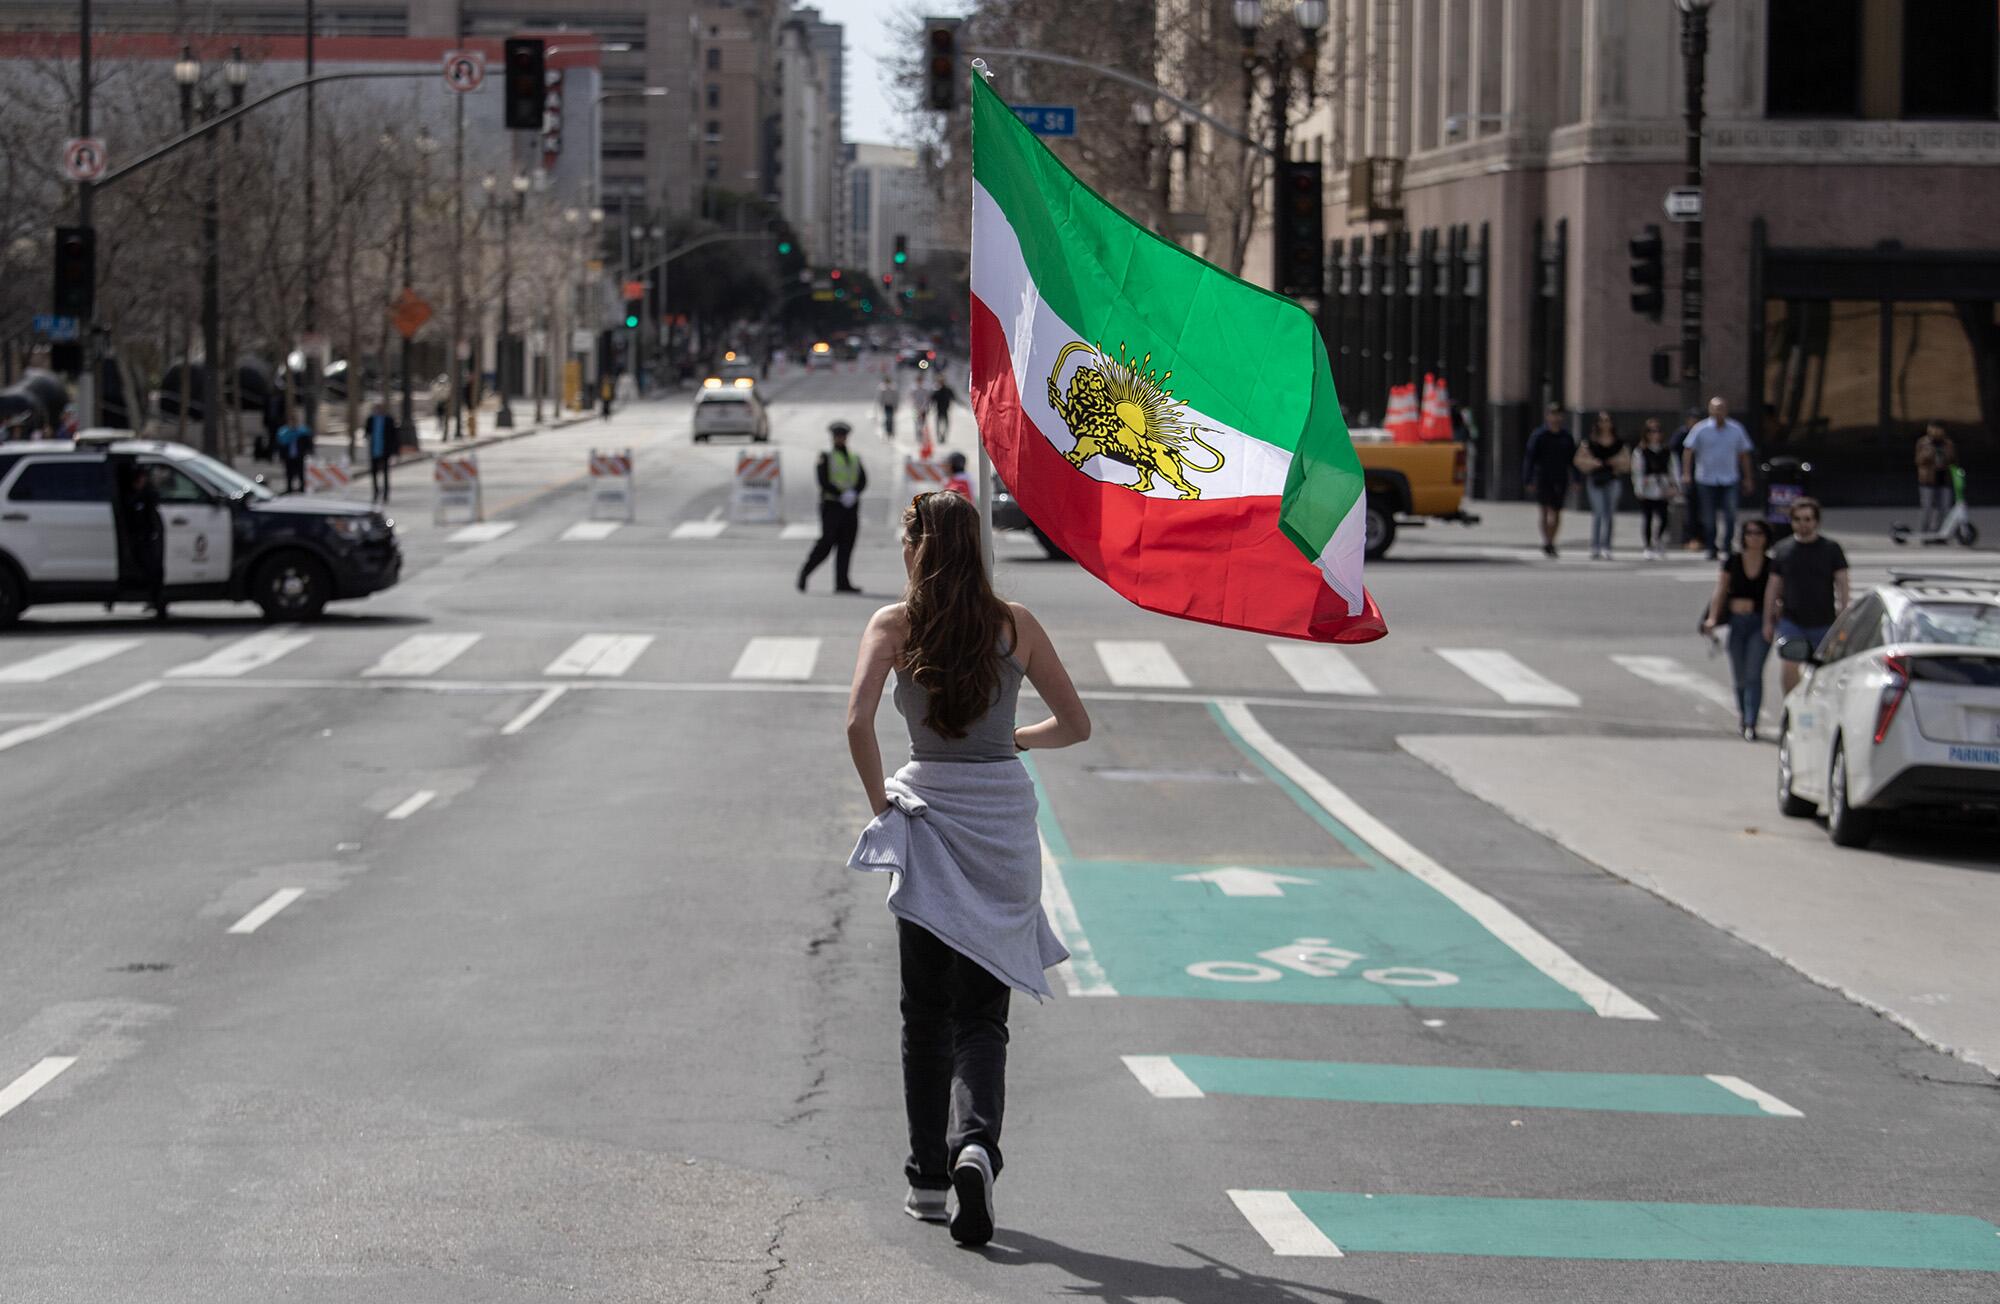 A woman carrying Iran's historical flag walks down the middle of a city street